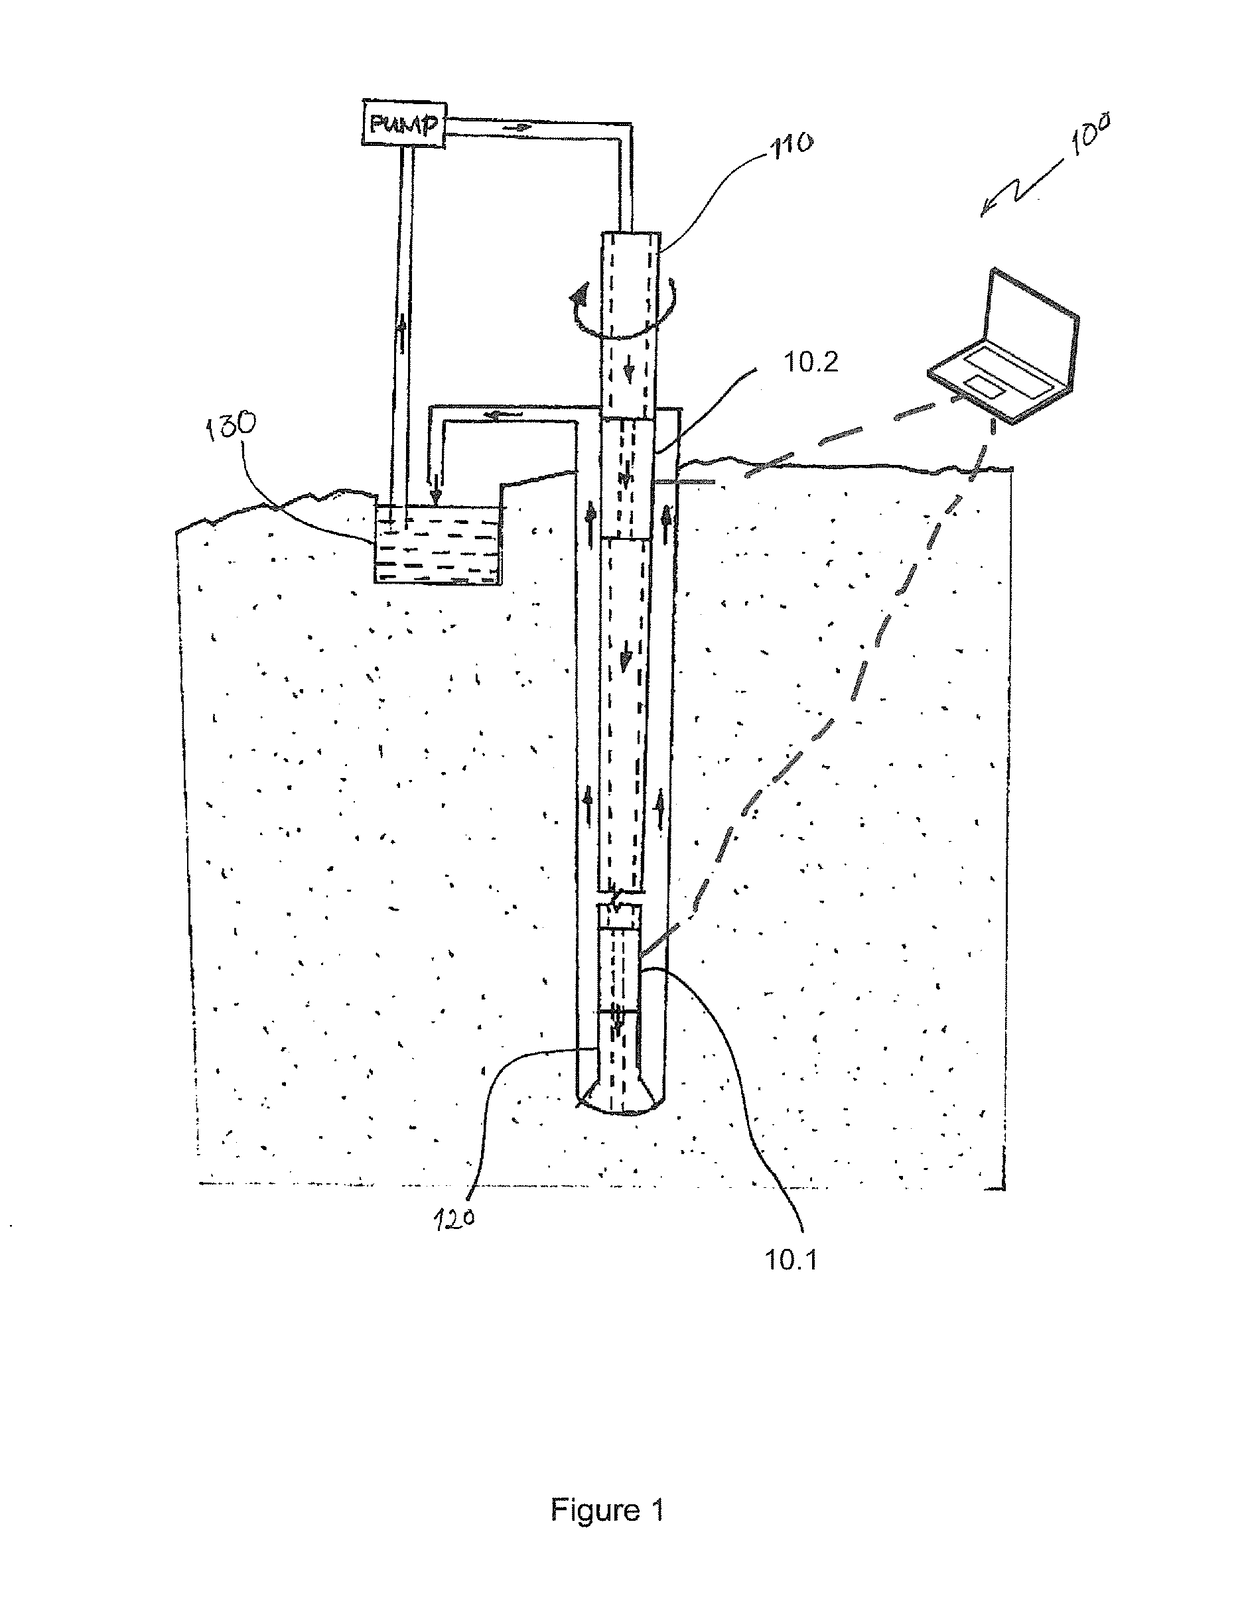 Apparatus and Method for Measuring Drilling Parameters of a Down-the-Hole Drilling Operation for Mineral Exploration